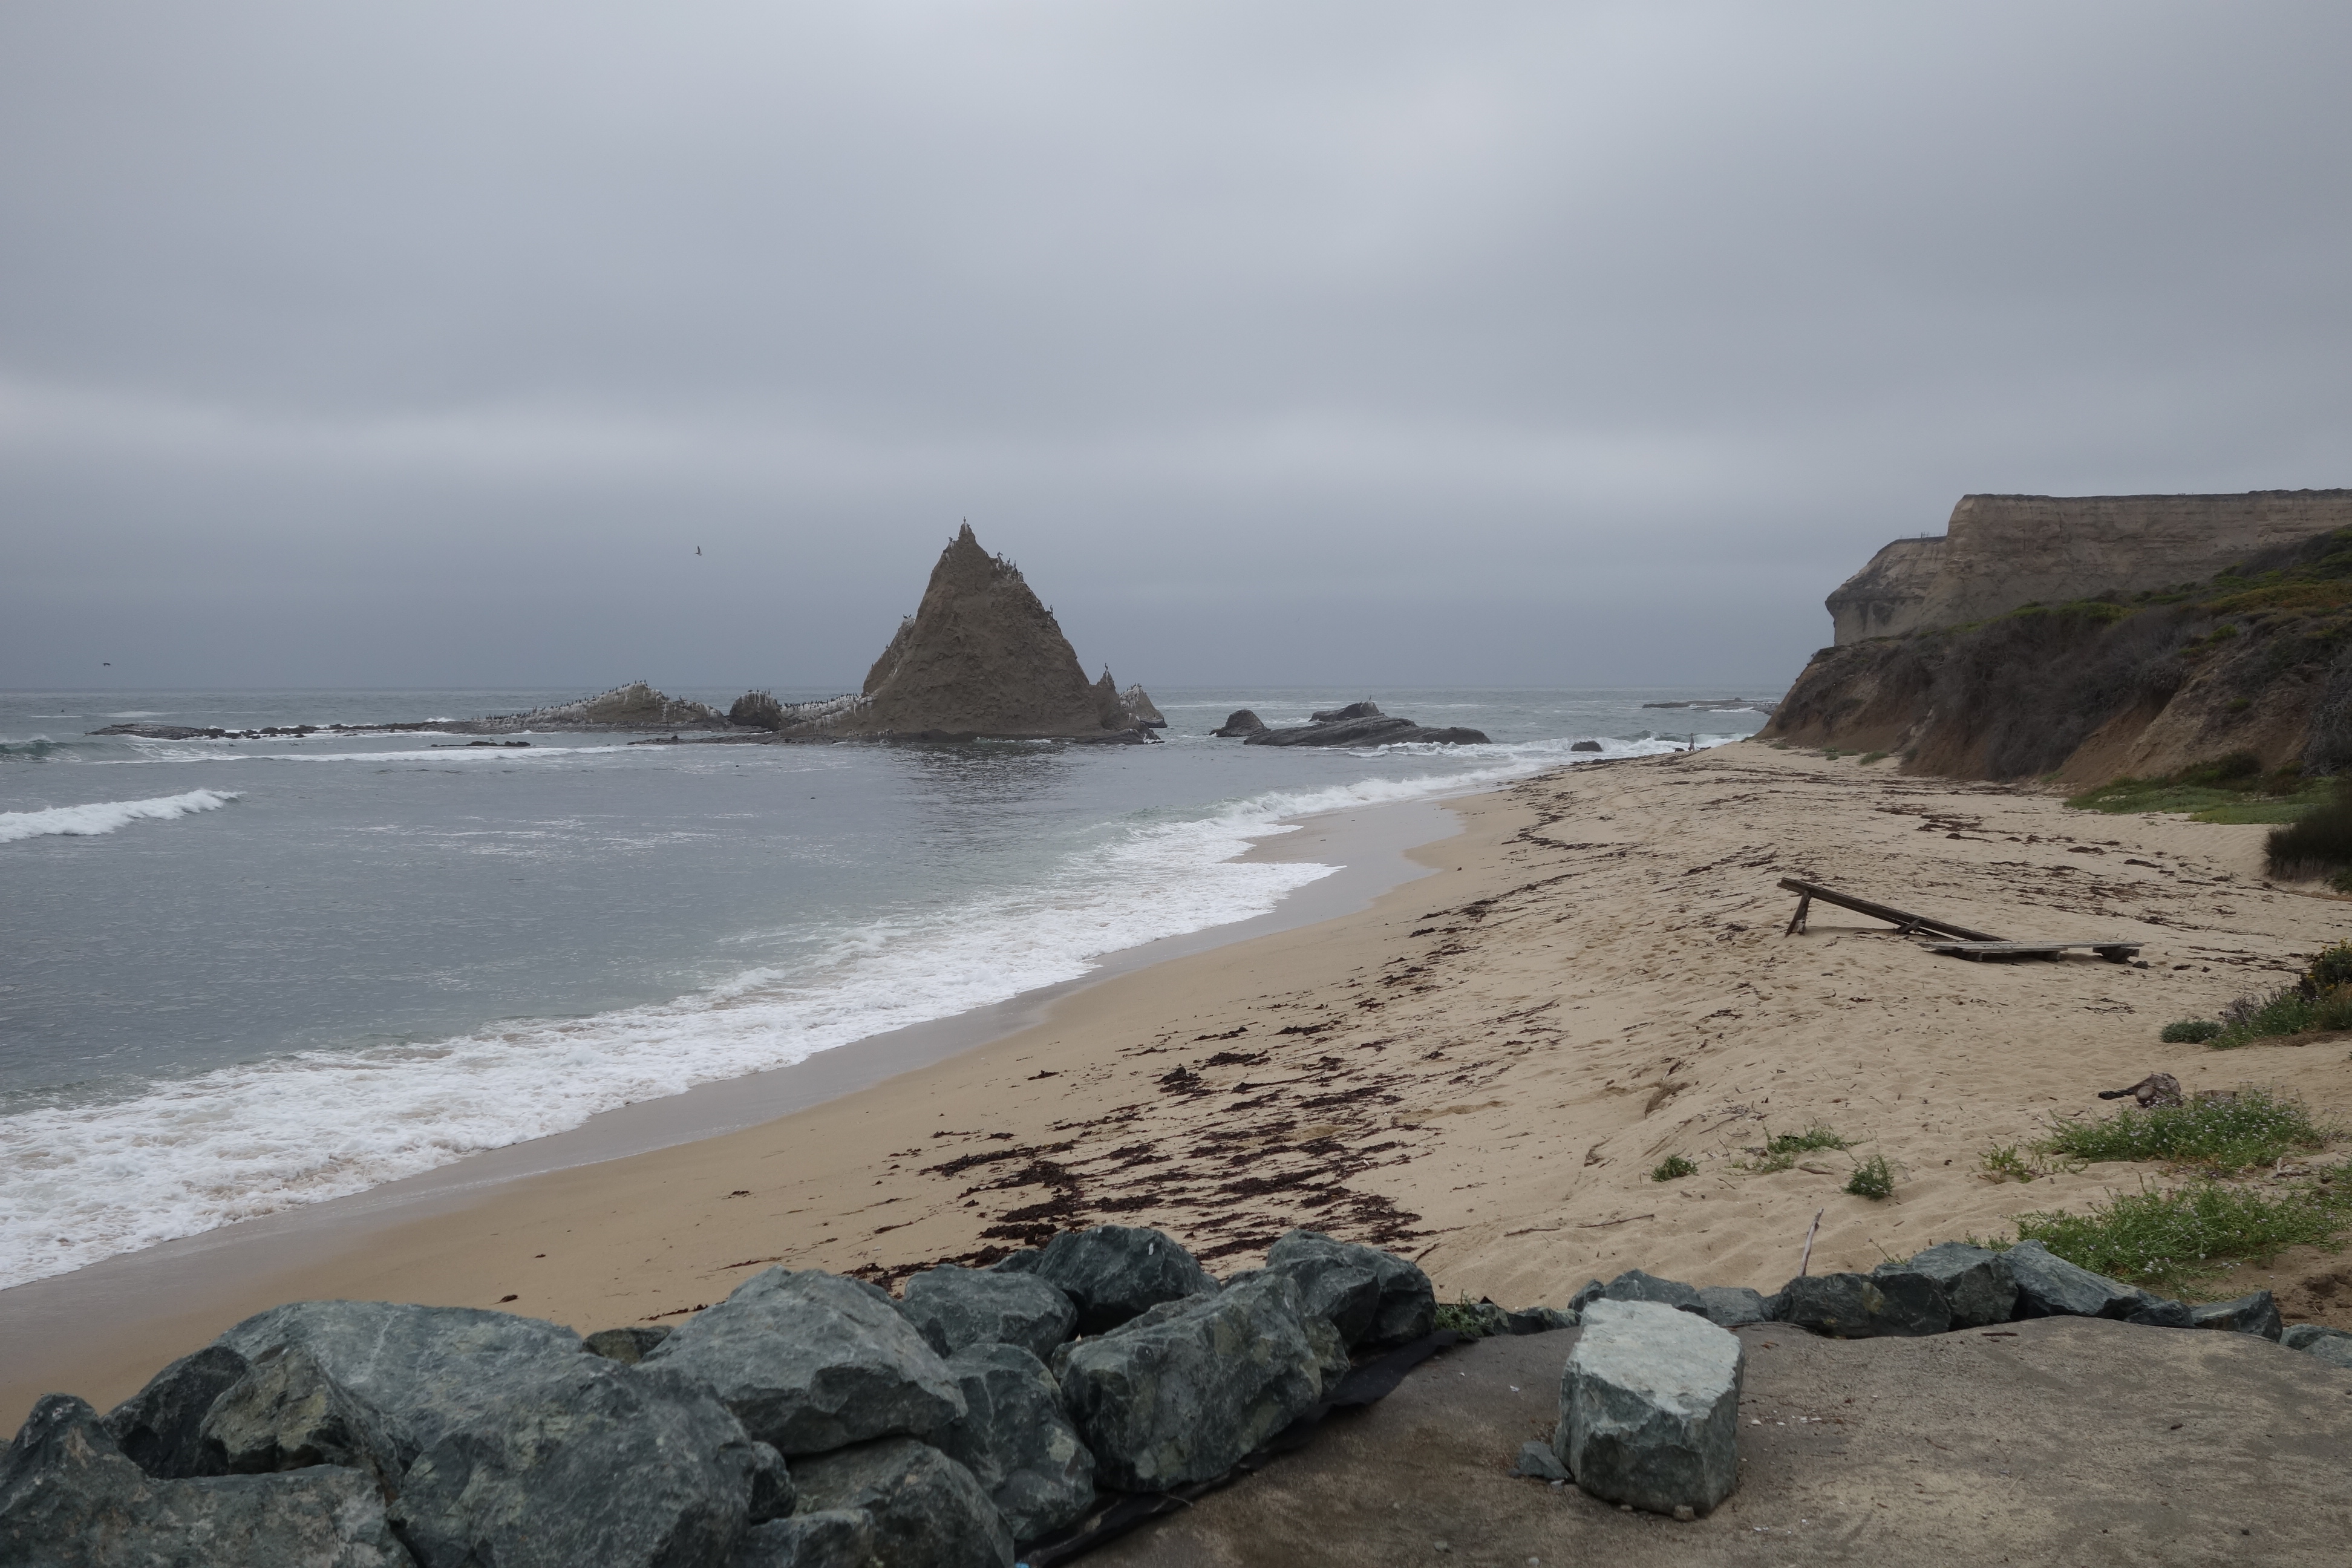 The view of Martins Beach from the bottom of Martins Beach Road includes a rock formation known as the "shark's tooth." (Katy Steinmetz for TIME)